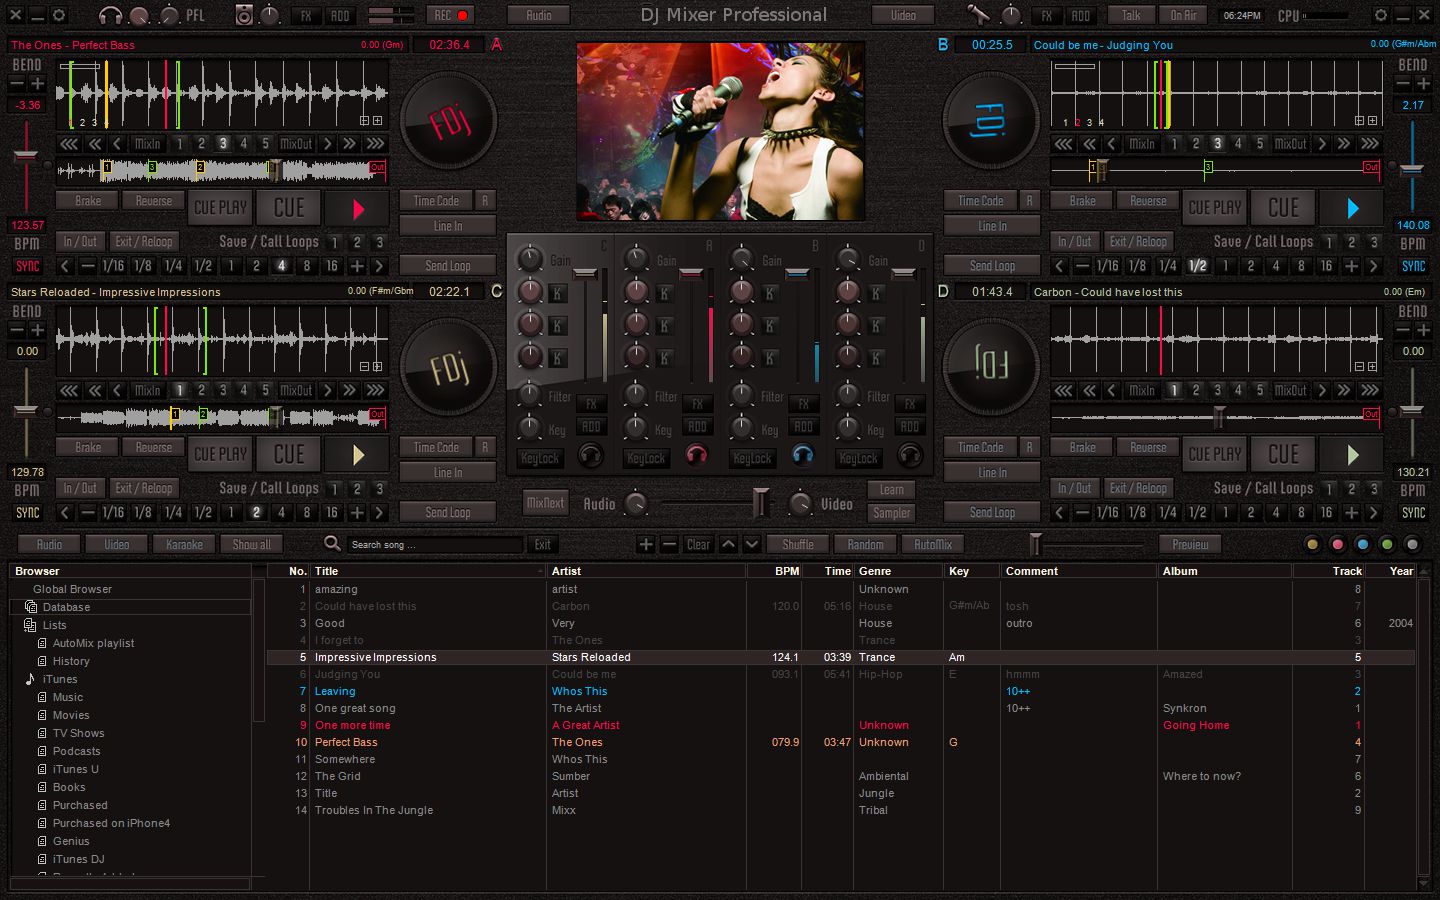 dj mixing software free download for mac